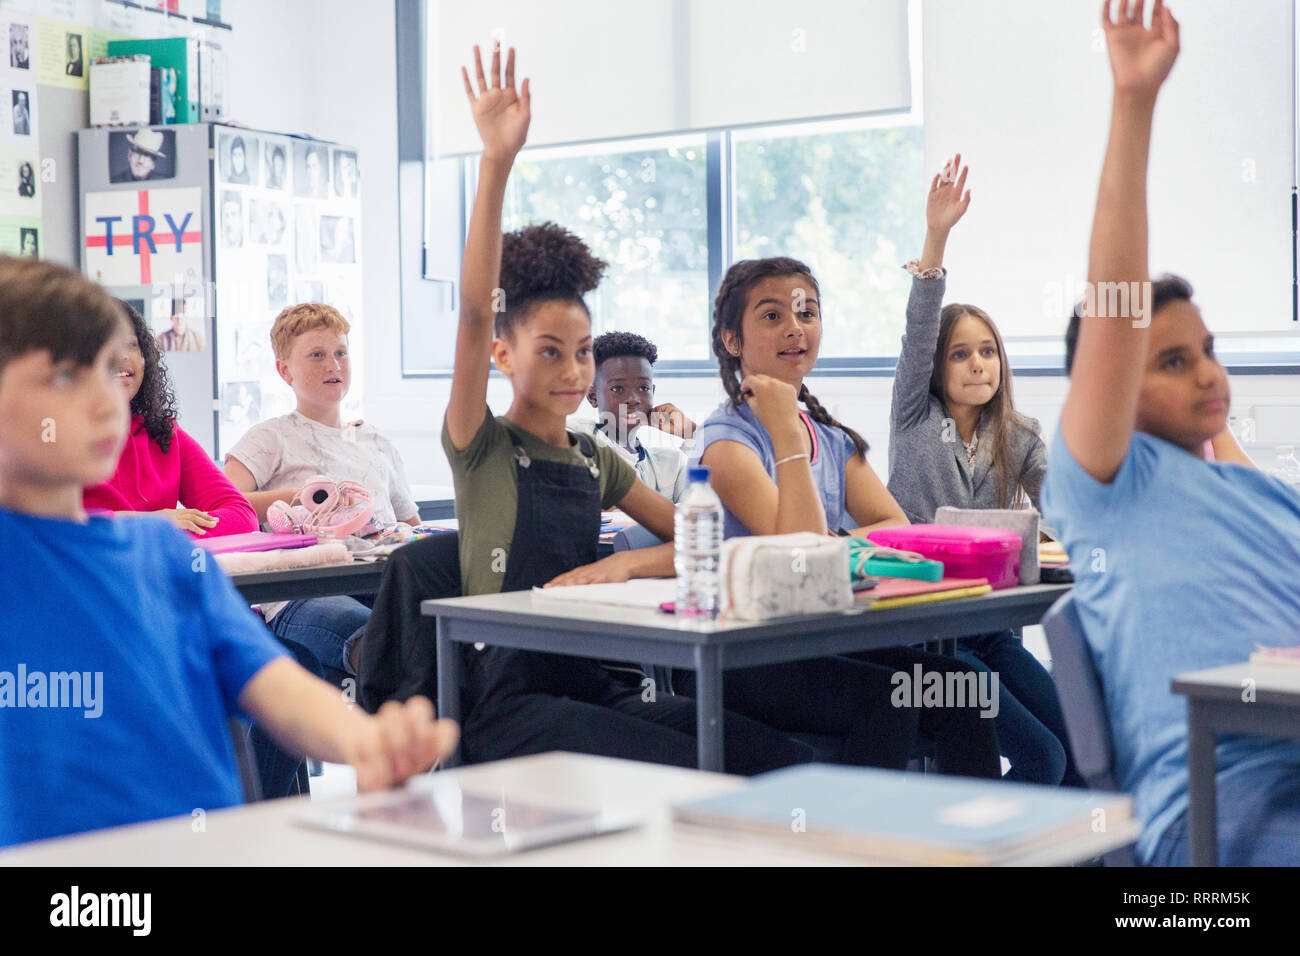 Junior high school students with hands raised in classroom Stock Photo